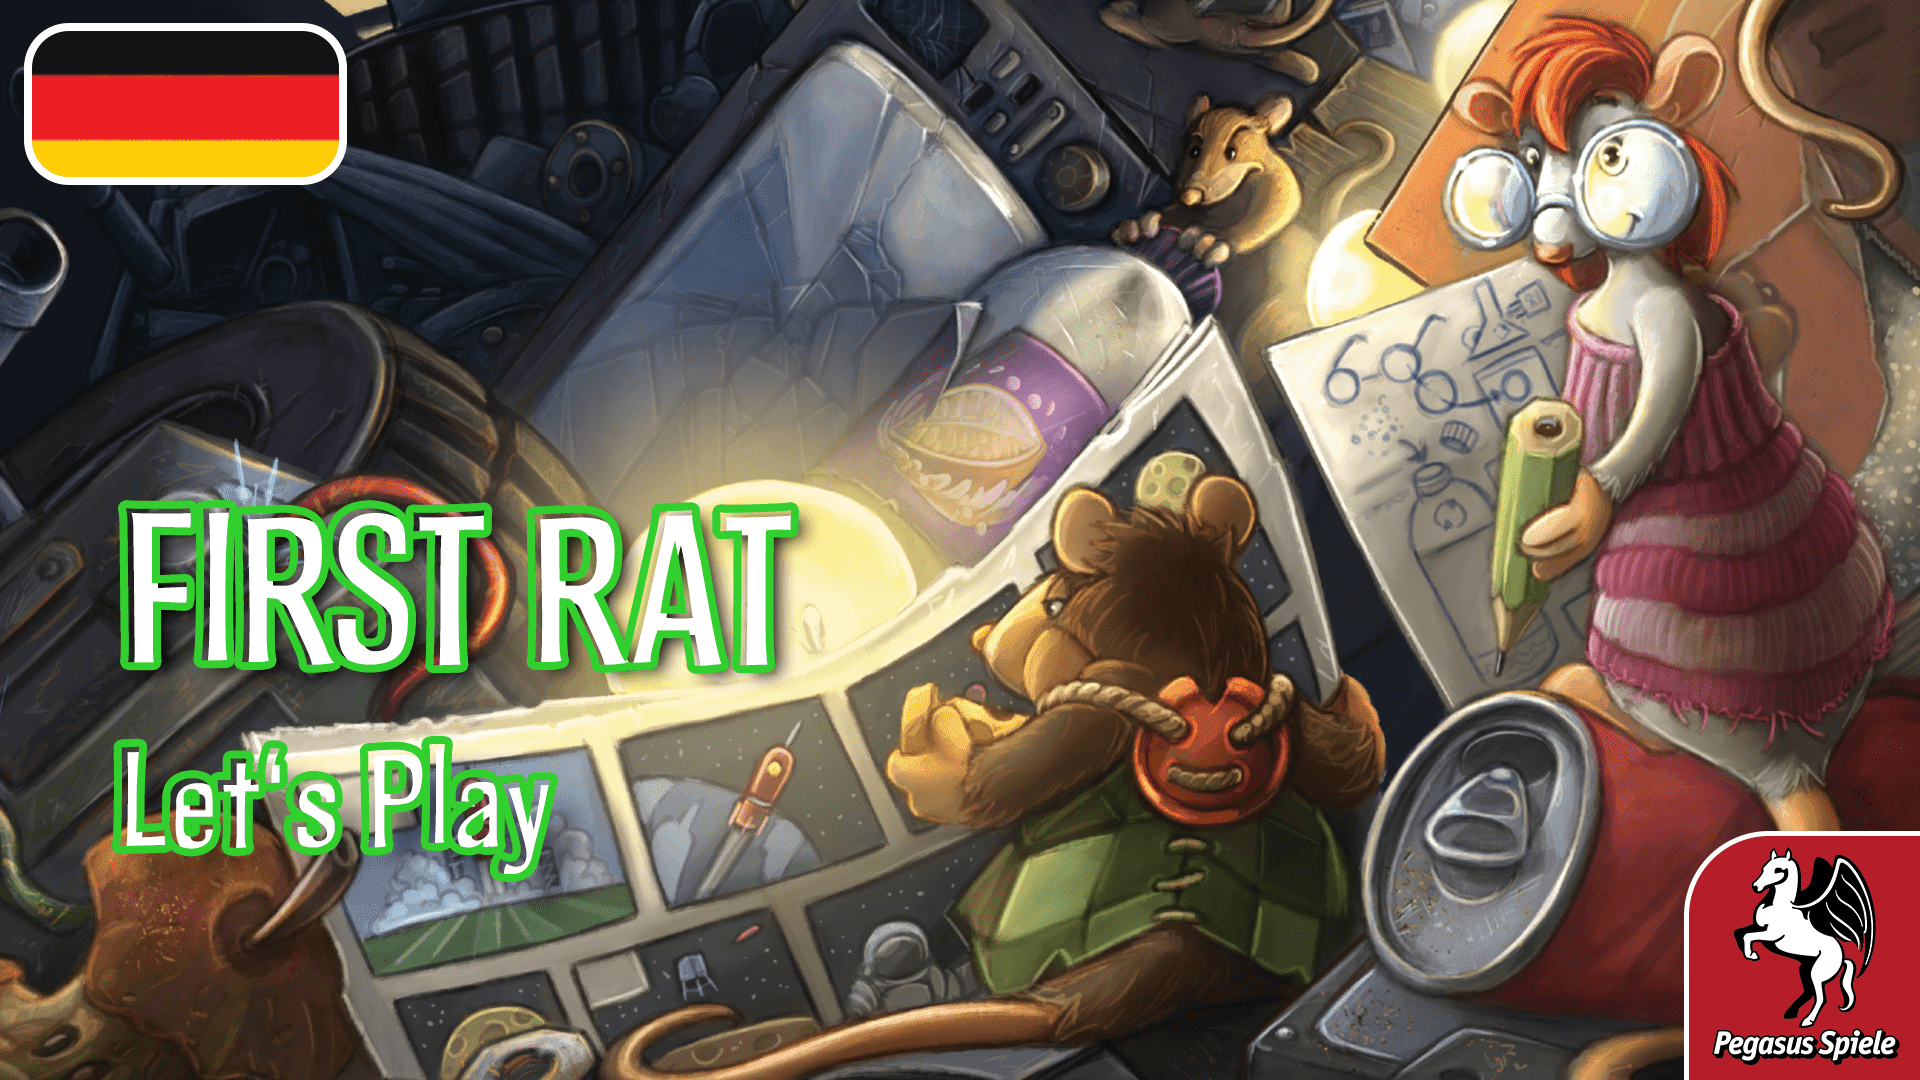 First Rat Let´s Play